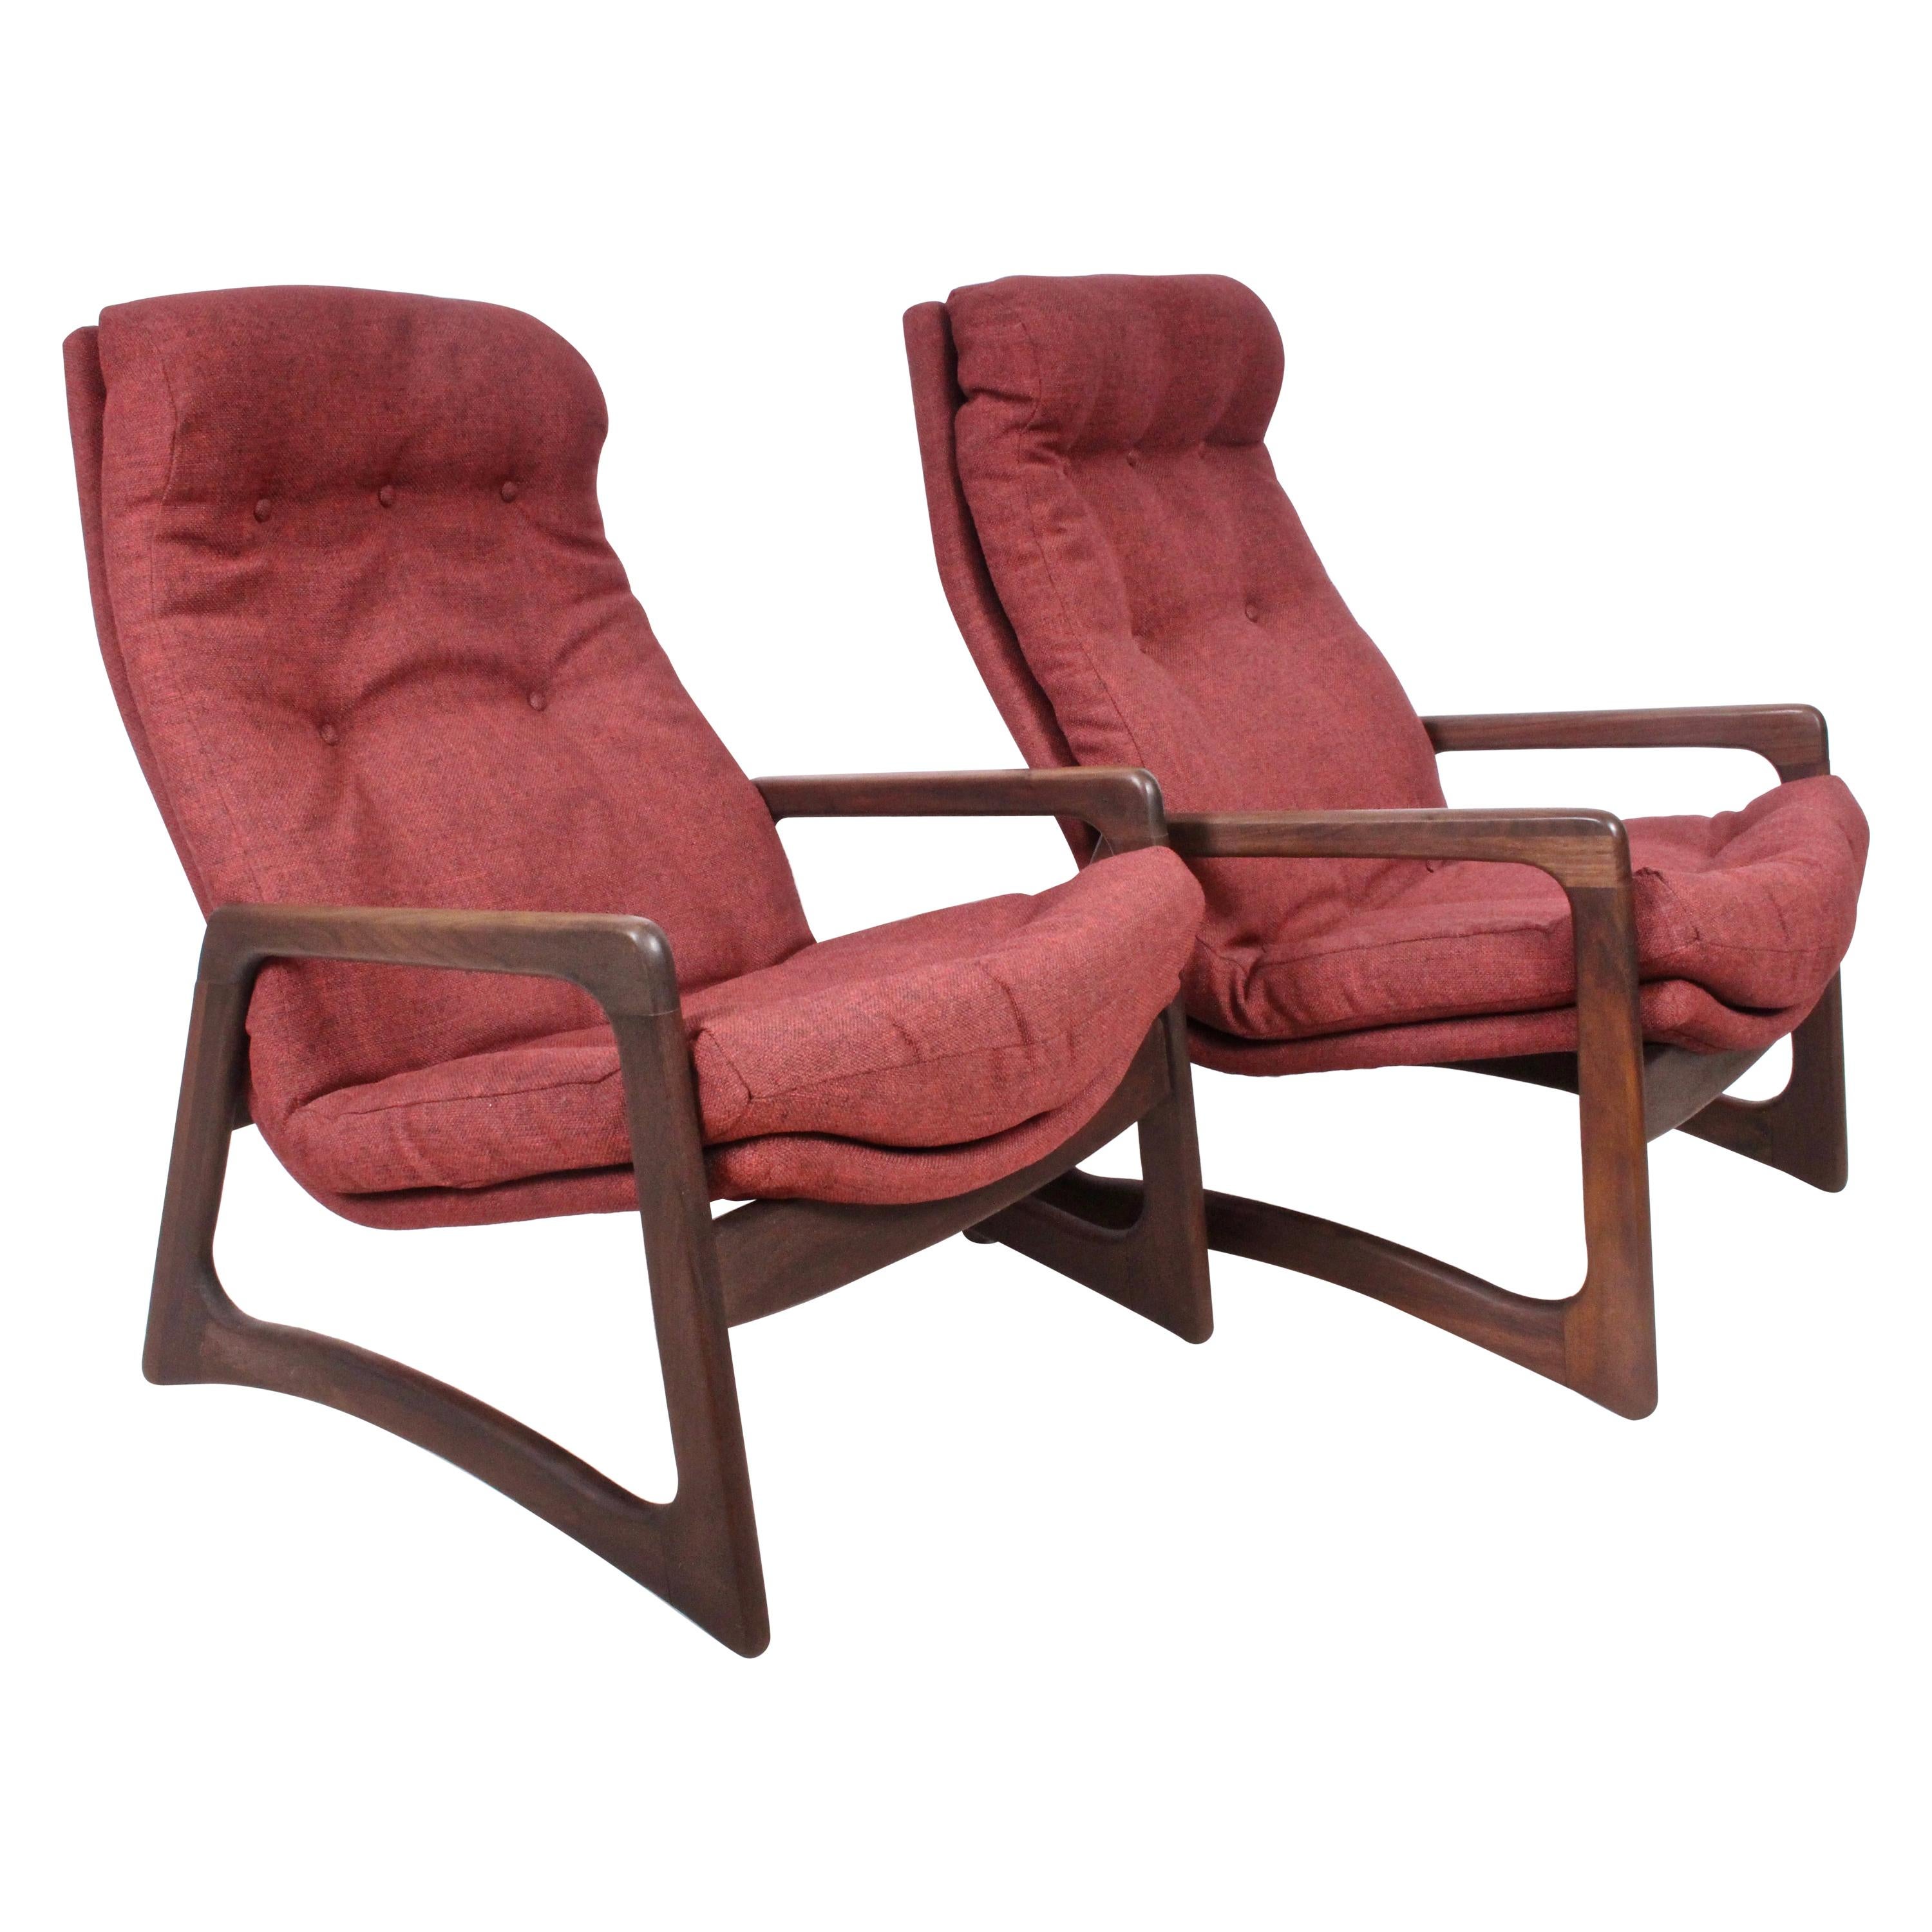 Pair Adrian Pearsall for Craft Associates Walnut Lounge Chairs